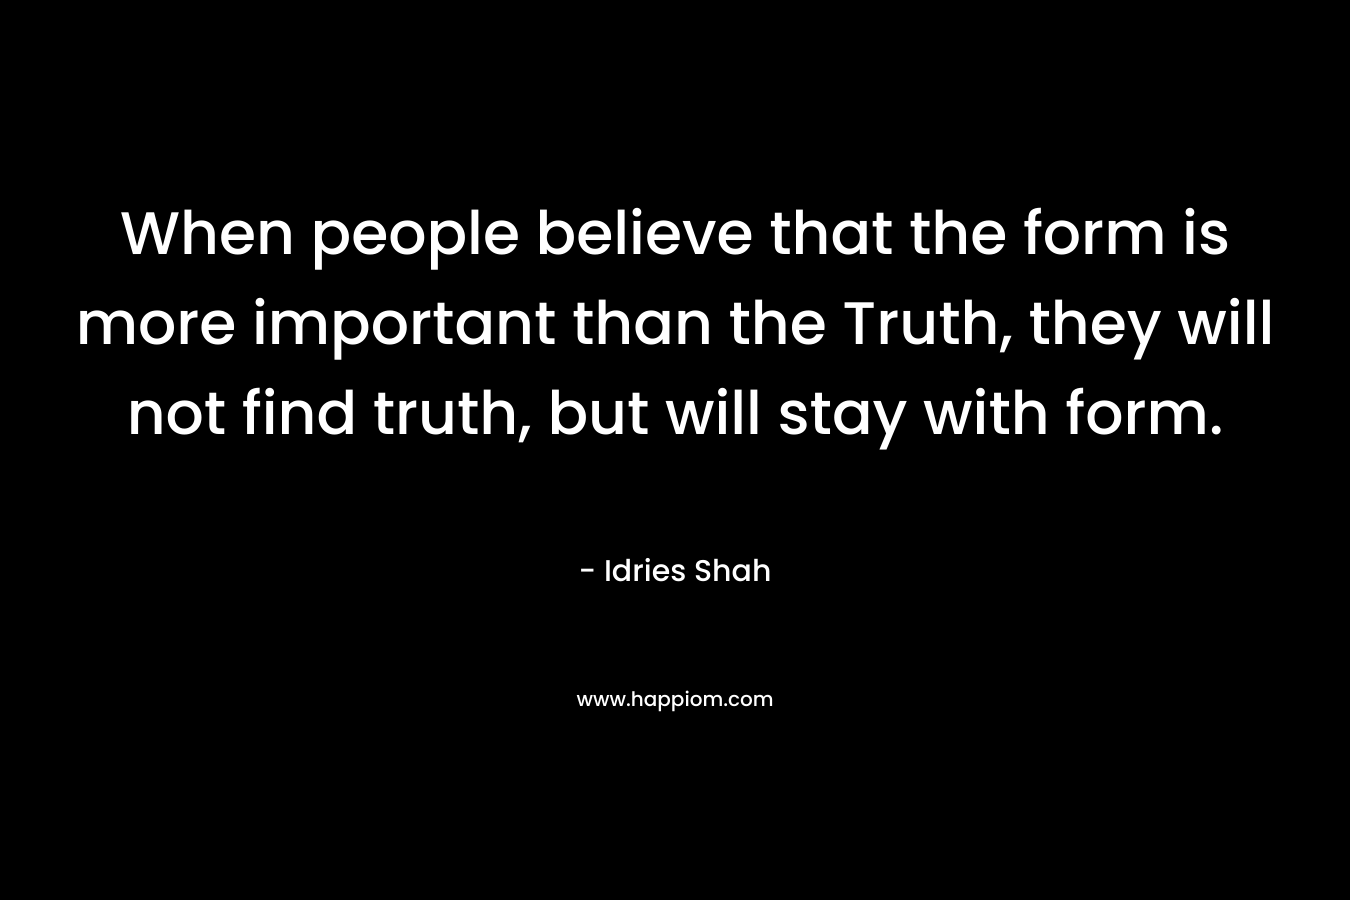 When people believe that the form is more important than the Truth, they will not find truth, but will stay with form.